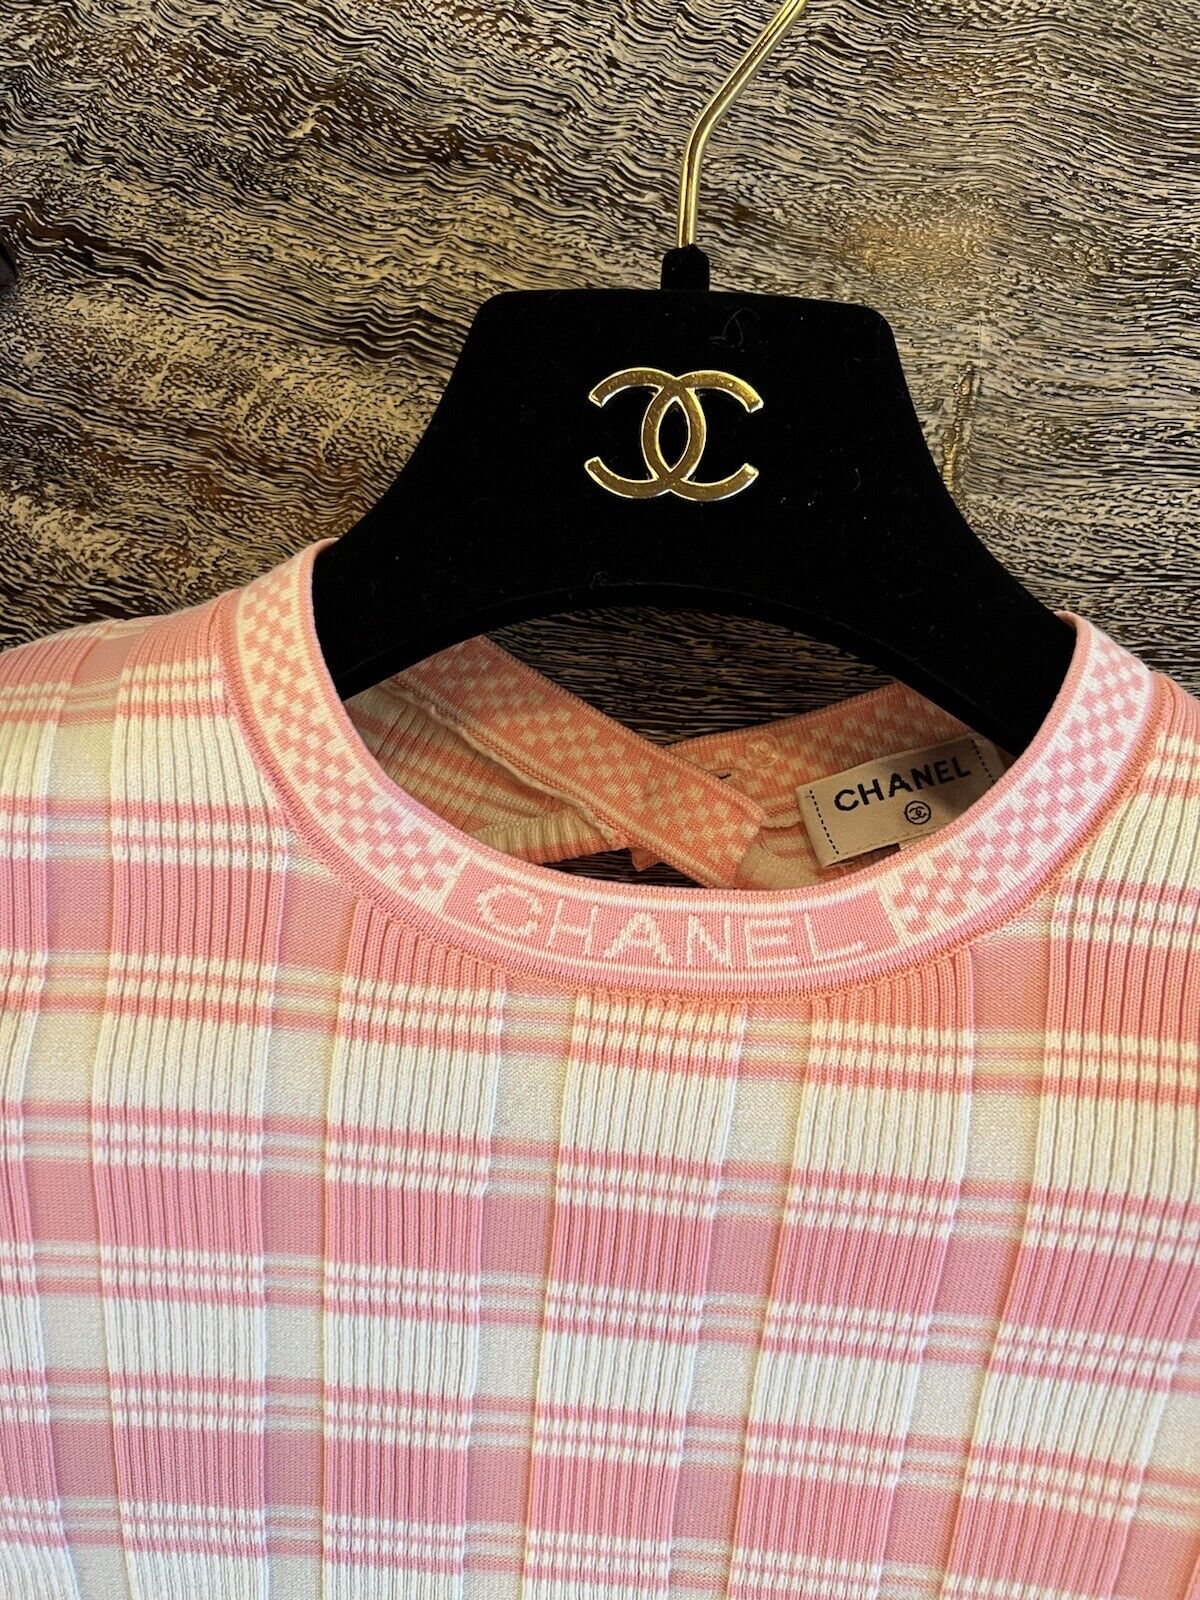 Chanel Crop Top Shirt 23C Collection In Pink/White Size 34 SOLD OUT  EVERYWHERE